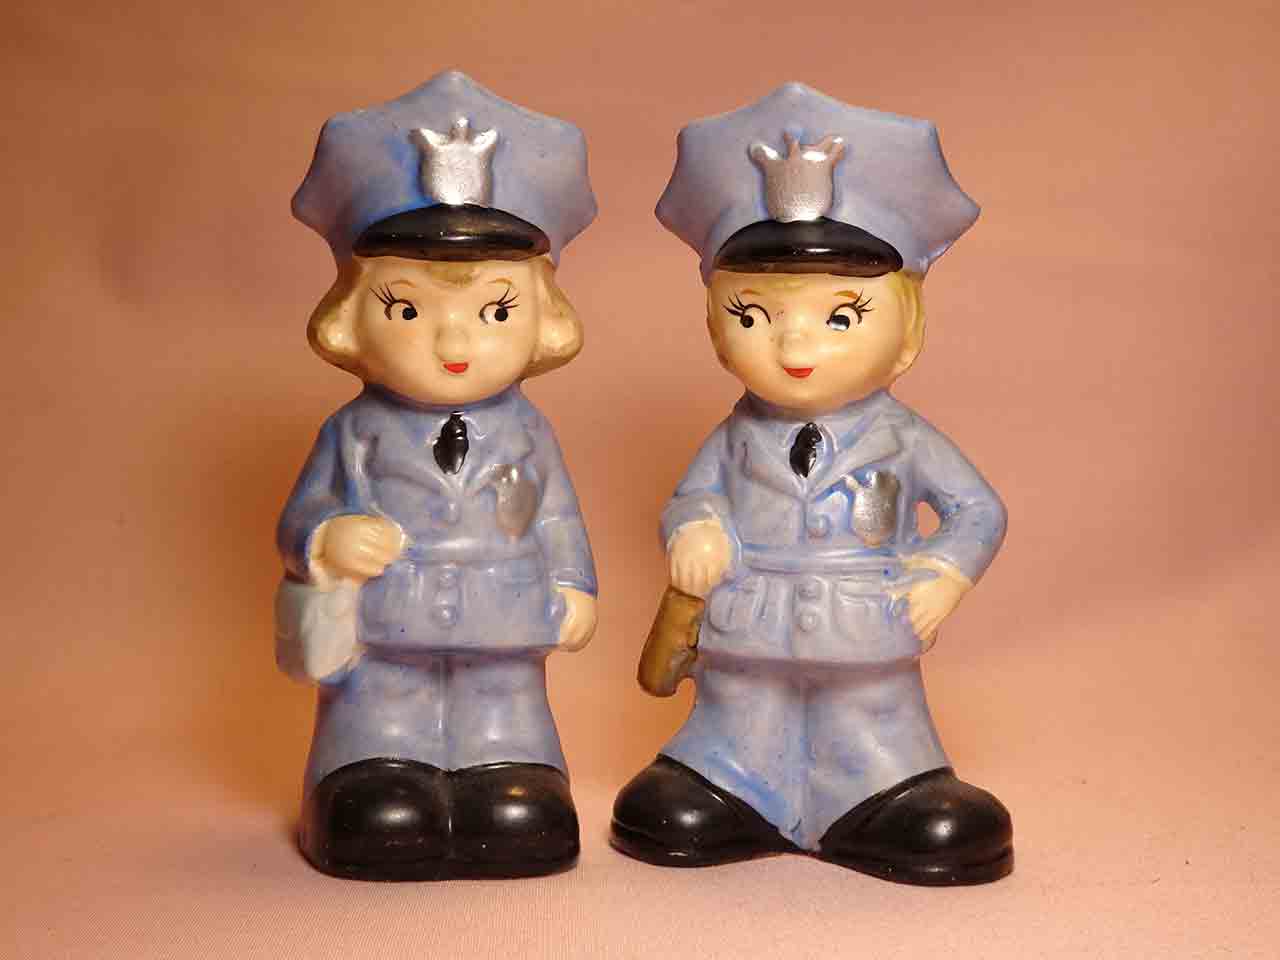 Lego Japan children dressed as various occupations salt and pepper shakers - police officers